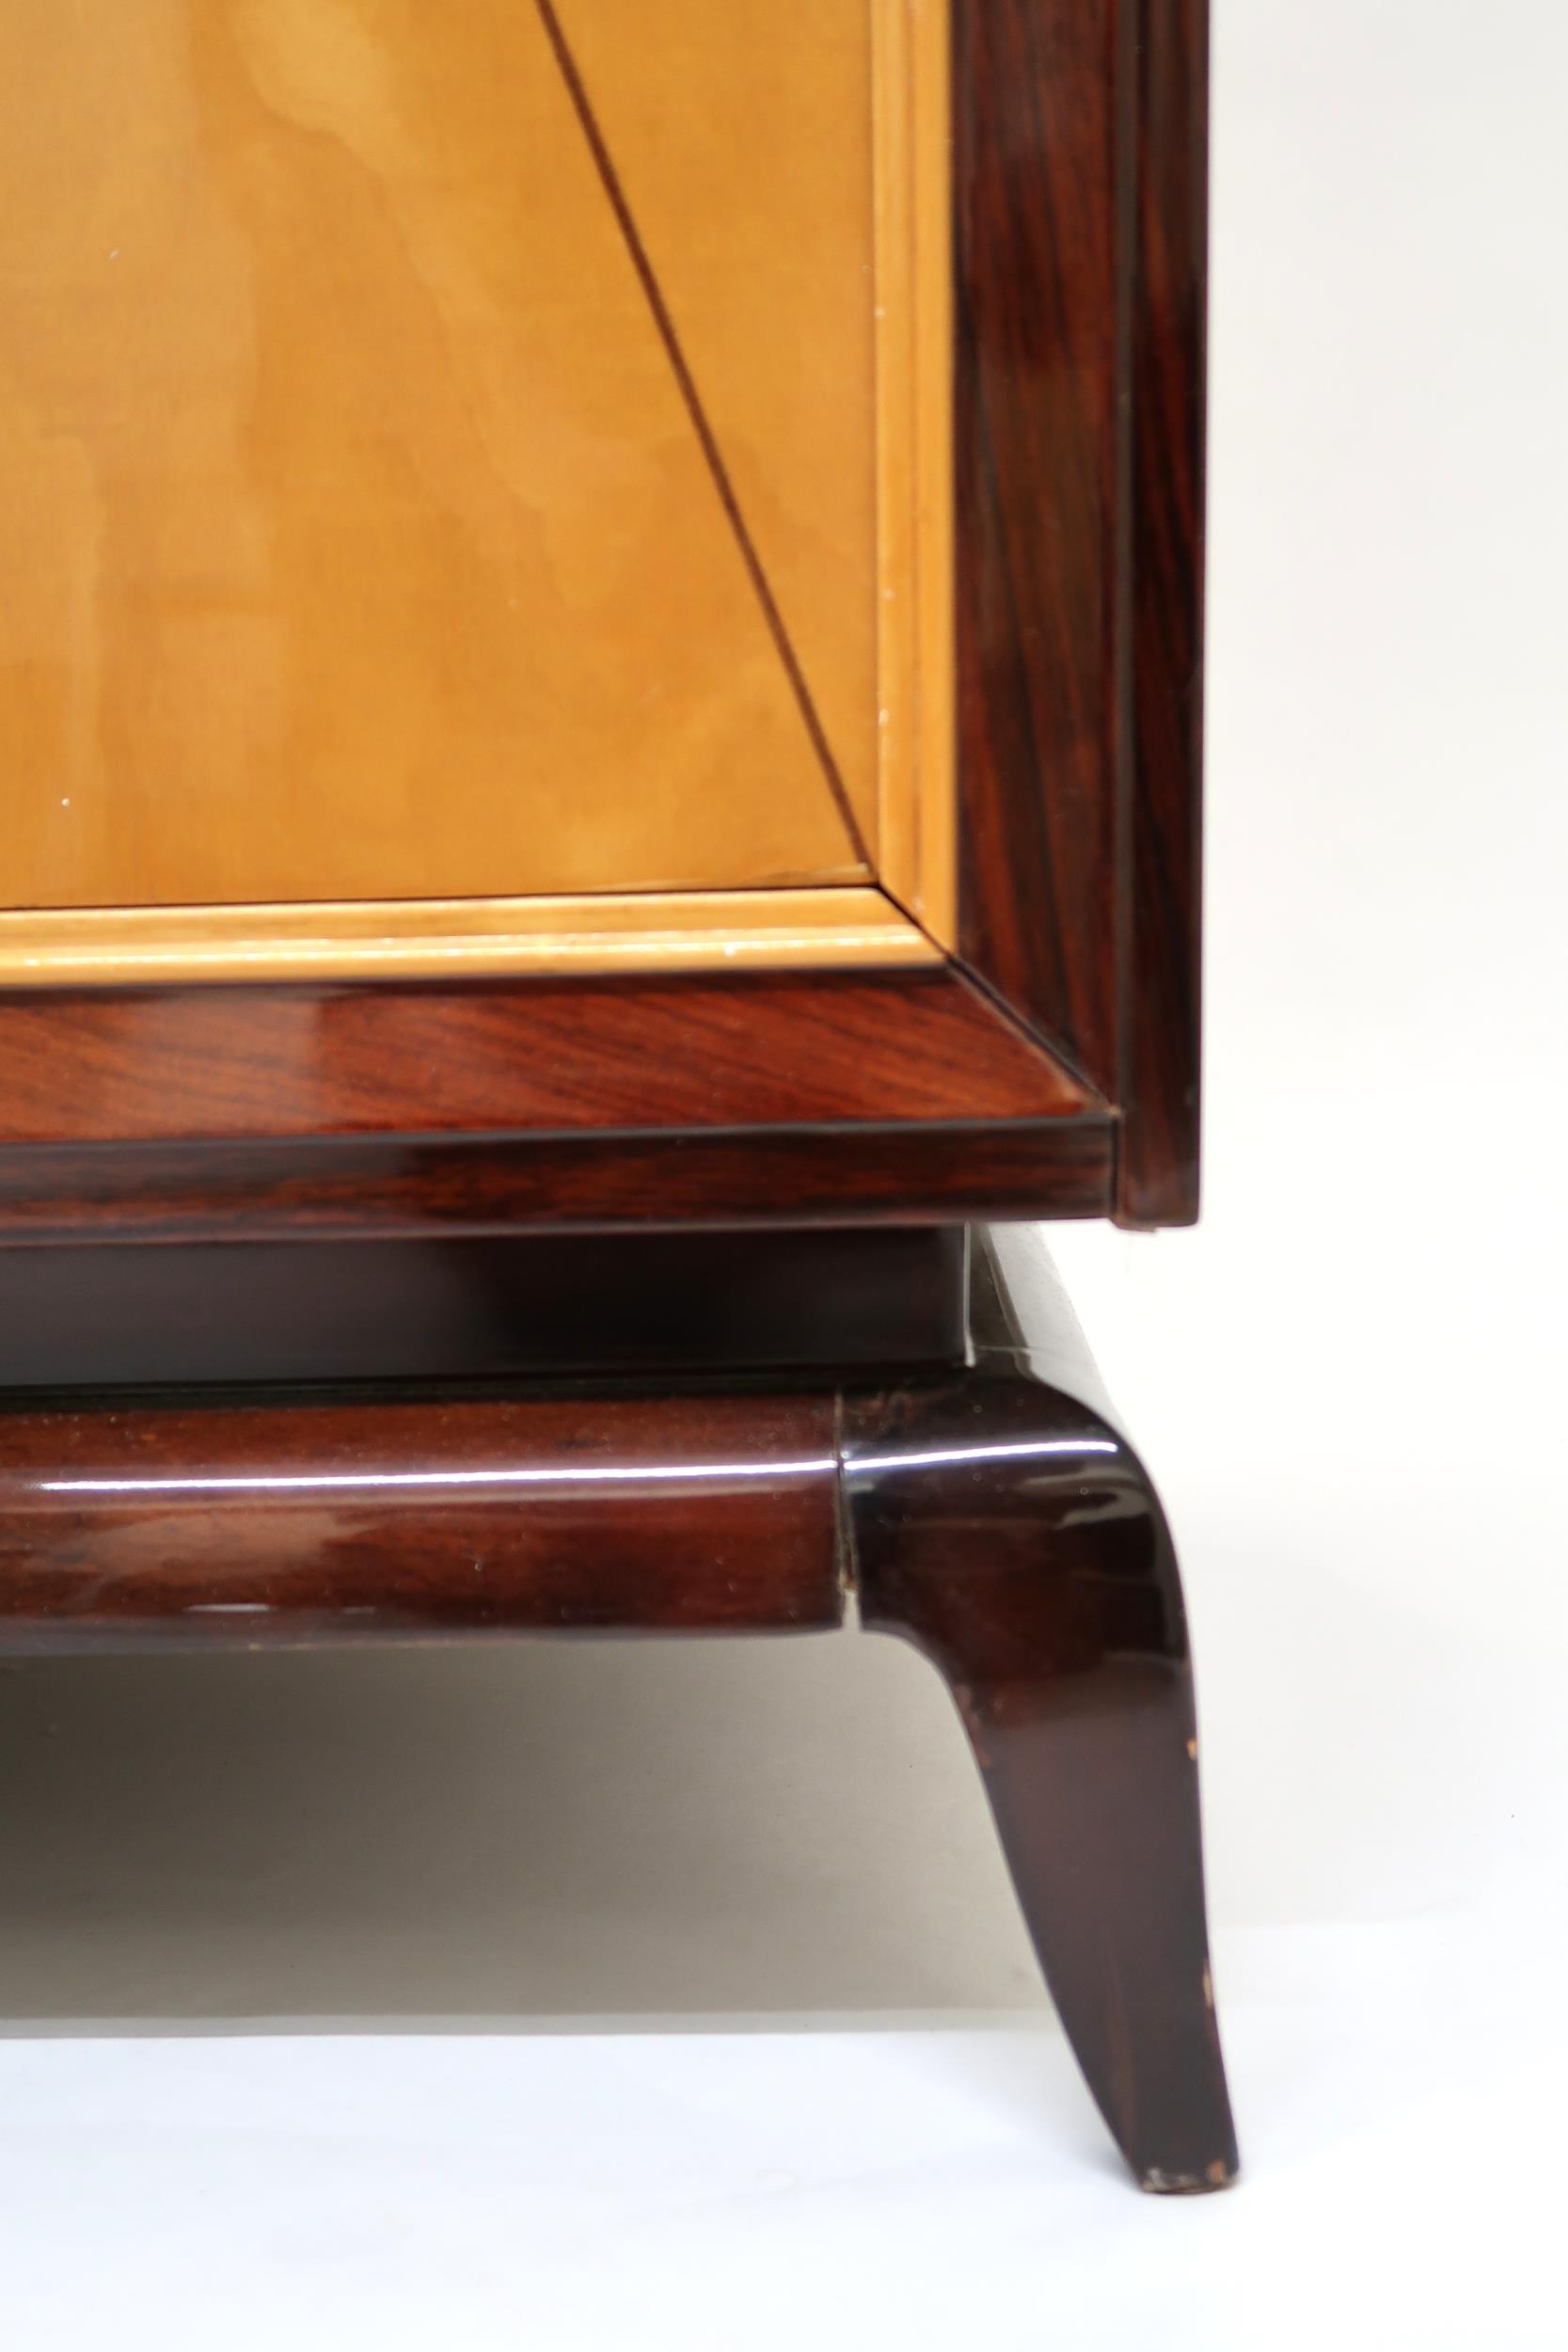 AN EARLY-20TH CENTURY FRENCH MAHOGANY AND SYCAMORE ART DECO OFFICE CABINET IN THE MANNER OF JULES - Image 5 of 16